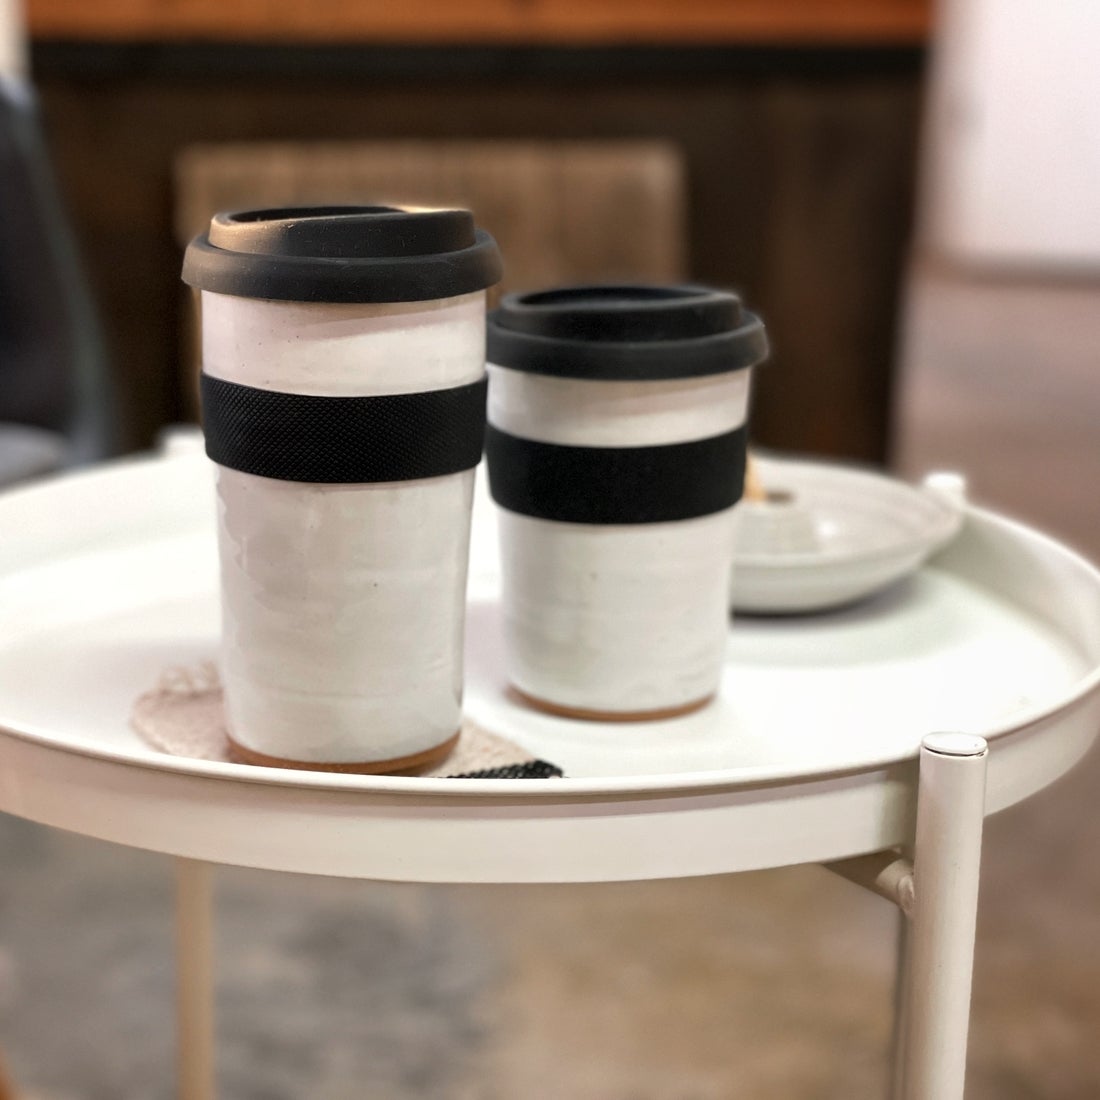 White Ceramic Travel Mug with Silicone Lid and Sleeve by Gravesco Pottery